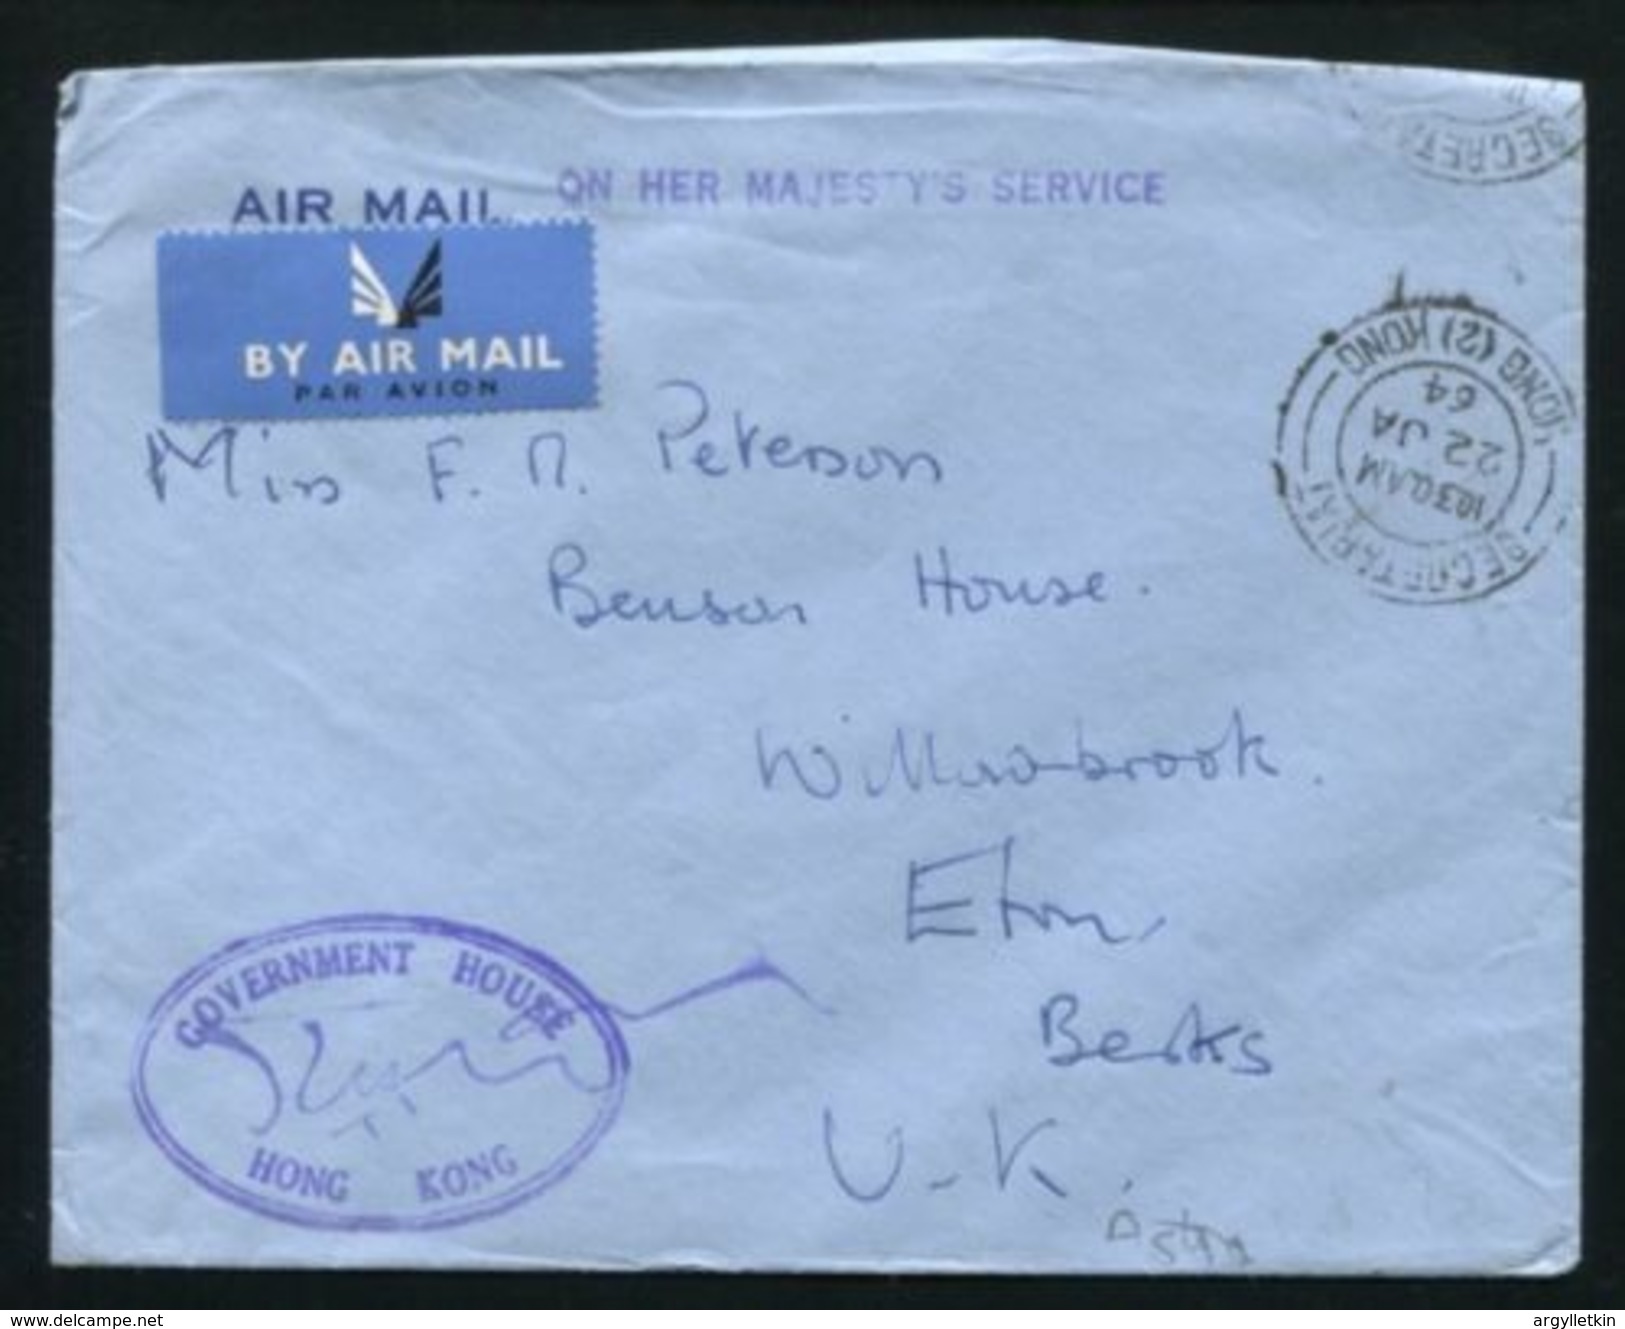 HONG KONG OHMS GOVERNMENT HOUSE ON ASTRA AIRMAIL ENVELOPE 1964 - Lettres & Documents